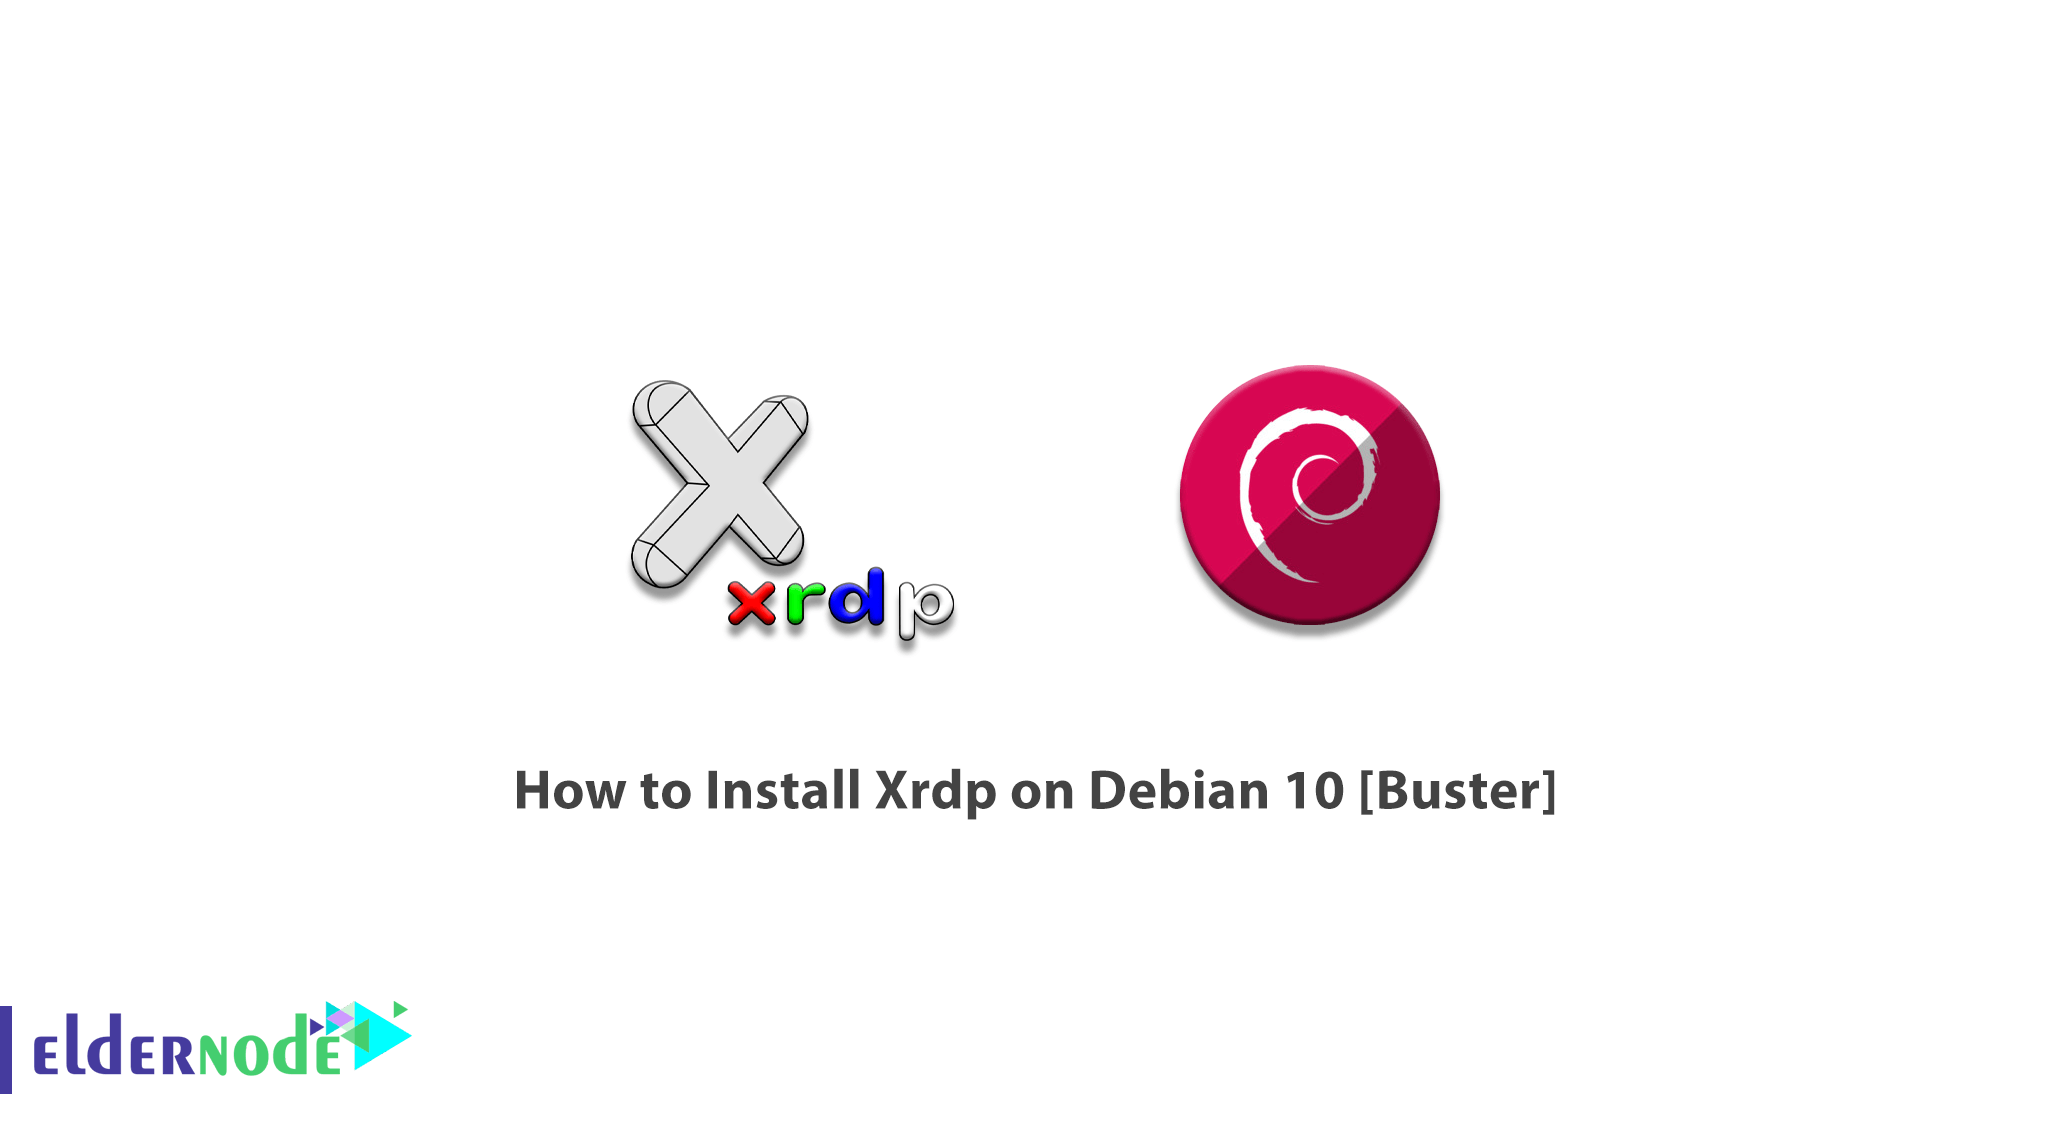 How to Install Xrdp on Debian 10 [Buster]